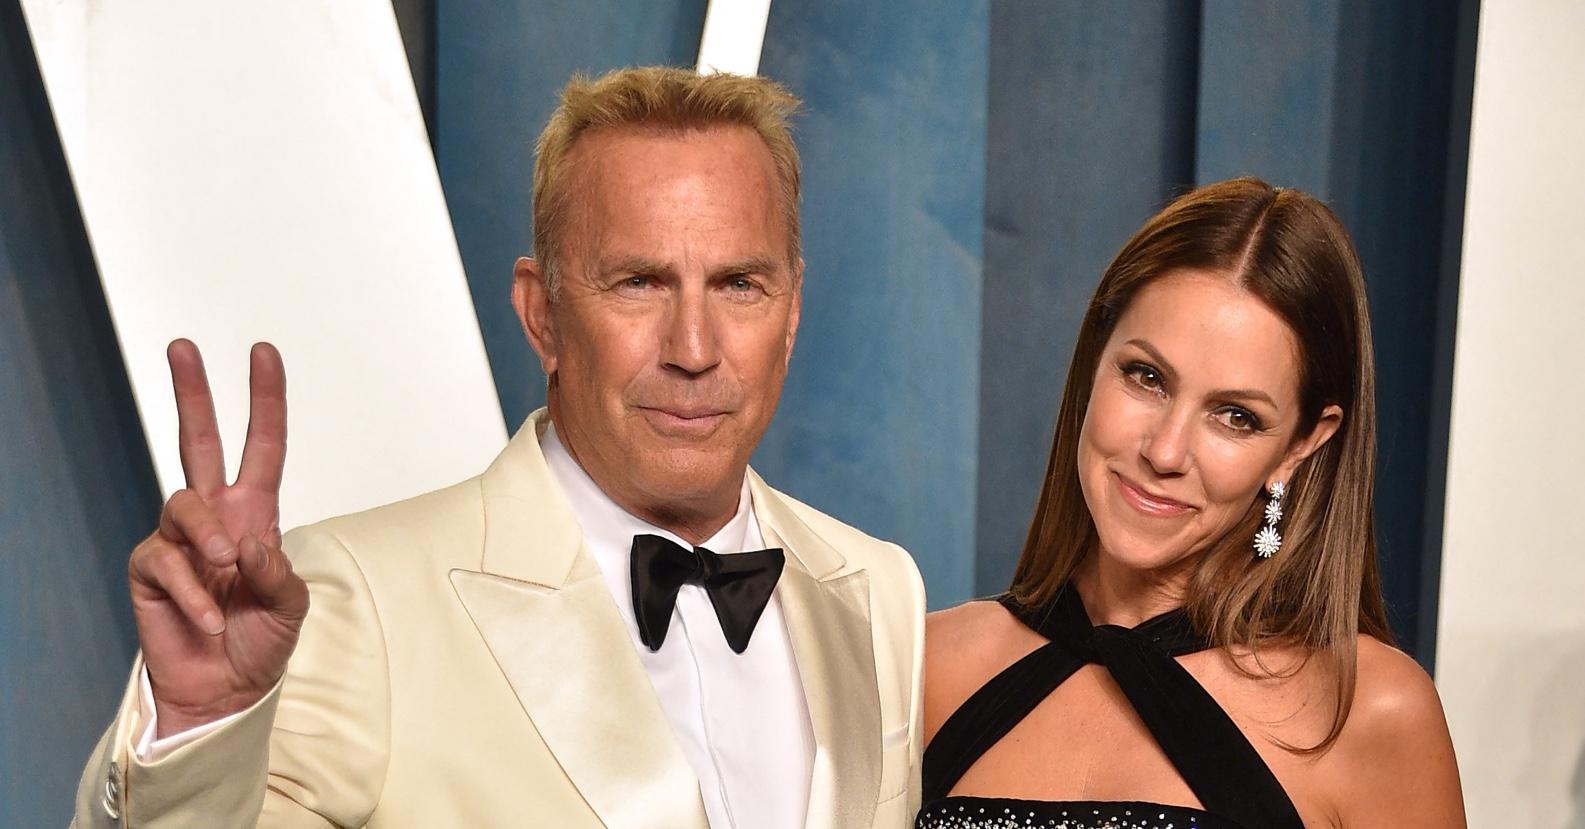 Kevin Costner Wears Wedding Ring 1 Day Before Wife Filed For Divorce image